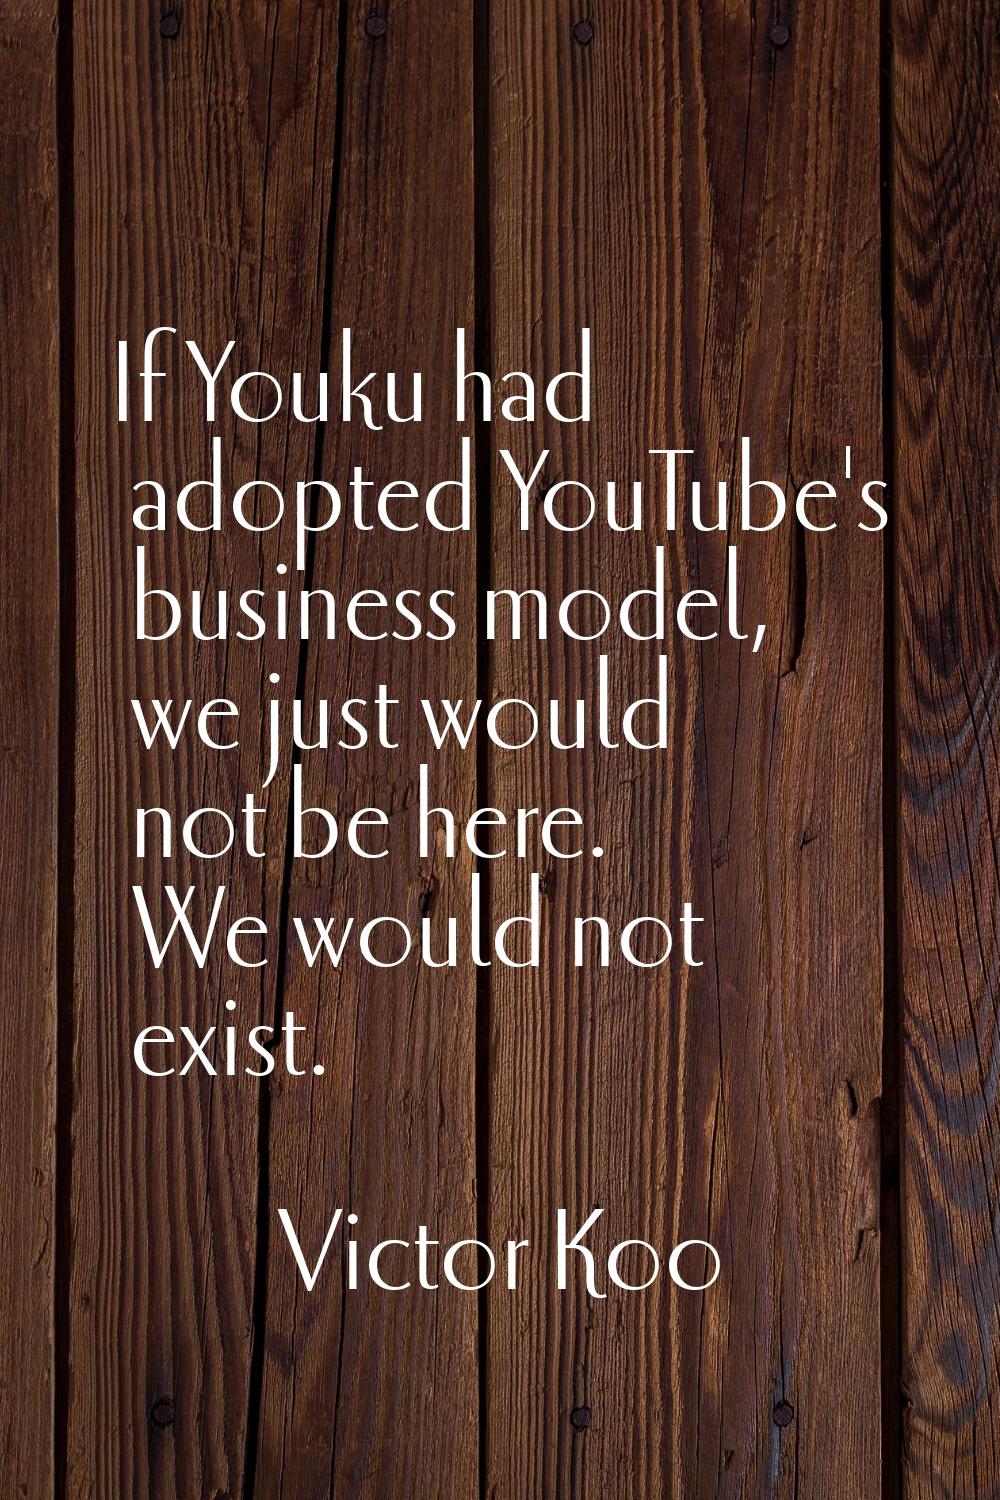 If Youku had adopted YouTube's business model, we just would not be here. We would not exist.